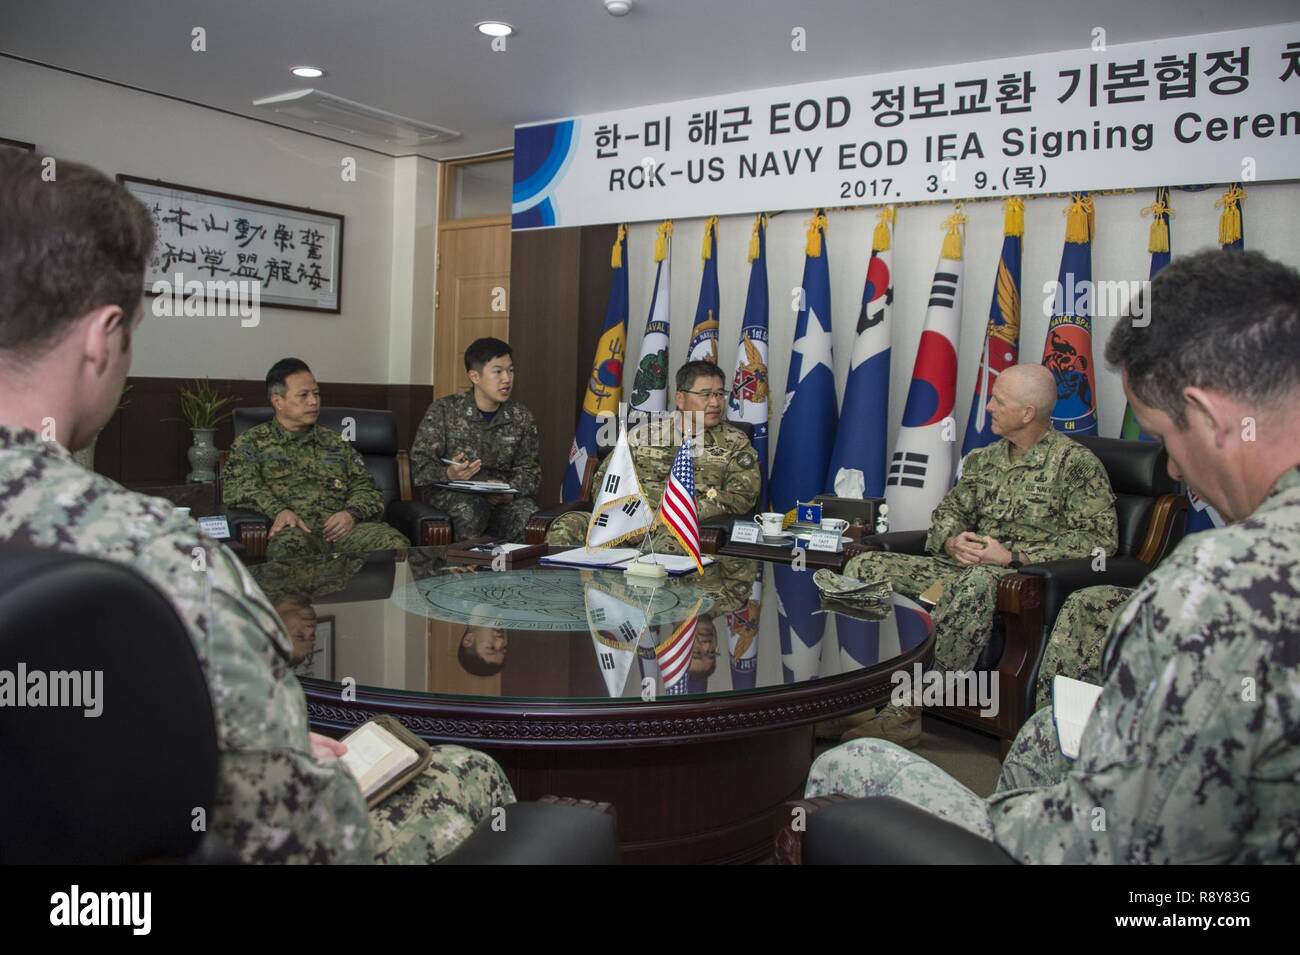 Commander, Task Force 75, U.S. Navy Capt. Robert A. Baughman, and Commander, Republic of Korea (ROK) Naval Special Warfare Flotilla, Rear Adm. Jae Eun Lee, speak during an information exchange agreement signing in Jinhae, ROK, March 9, 2017, as part of exercise Foal Eagle 2017. The agreement addresses research and development practices between the two nations, promotes explosive ordnance disposal interoperability, and enhances future readiness. Stock Photo